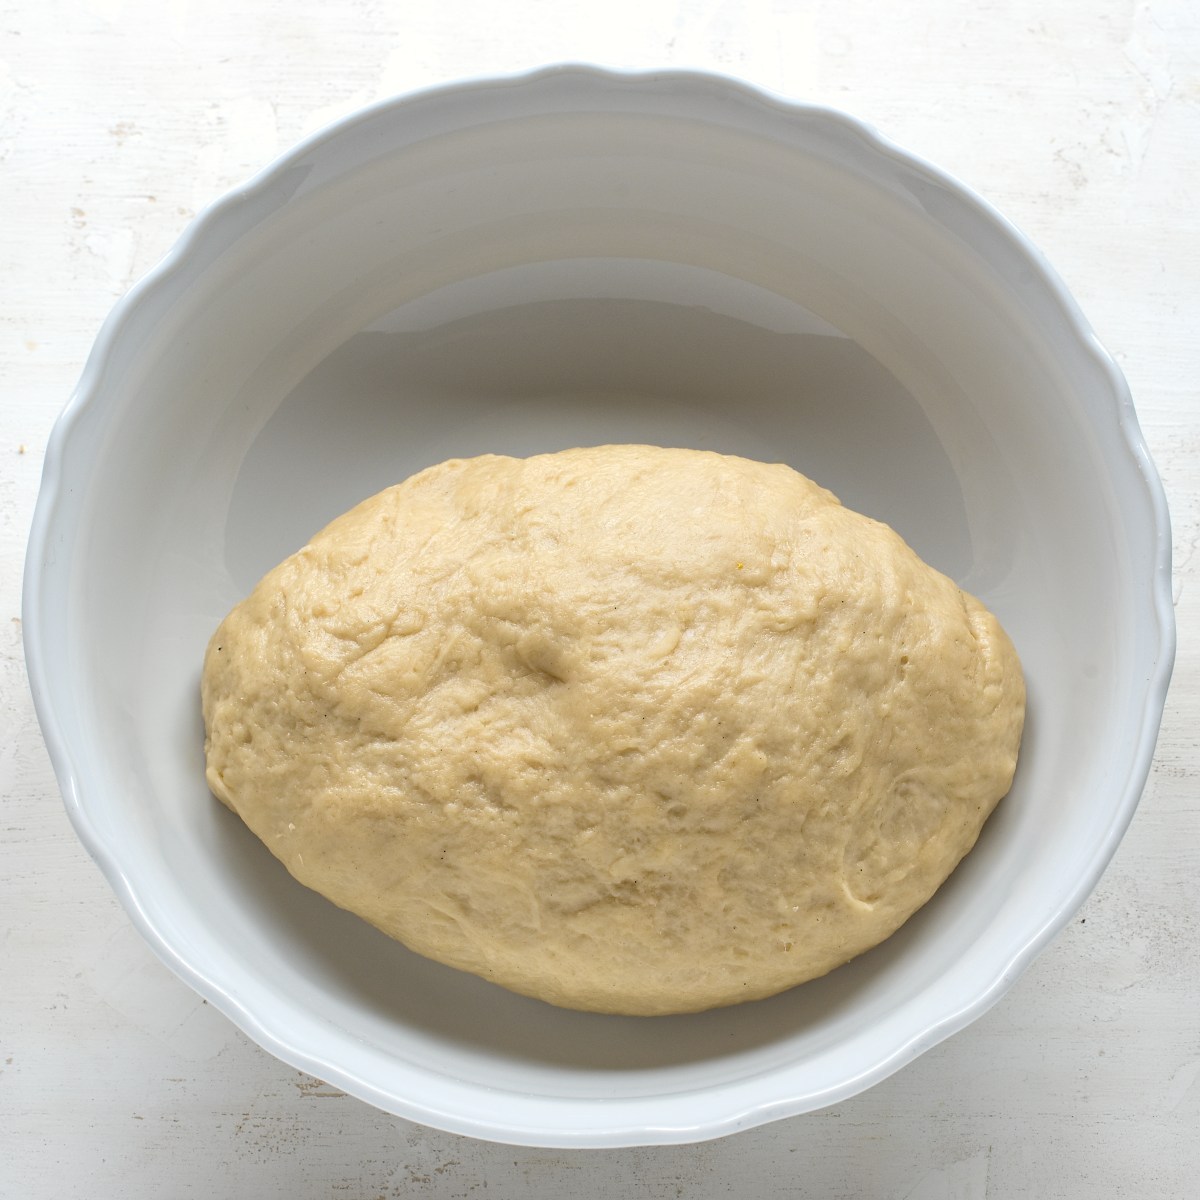 Yeasted dough in a white bowl before letting it to rise.